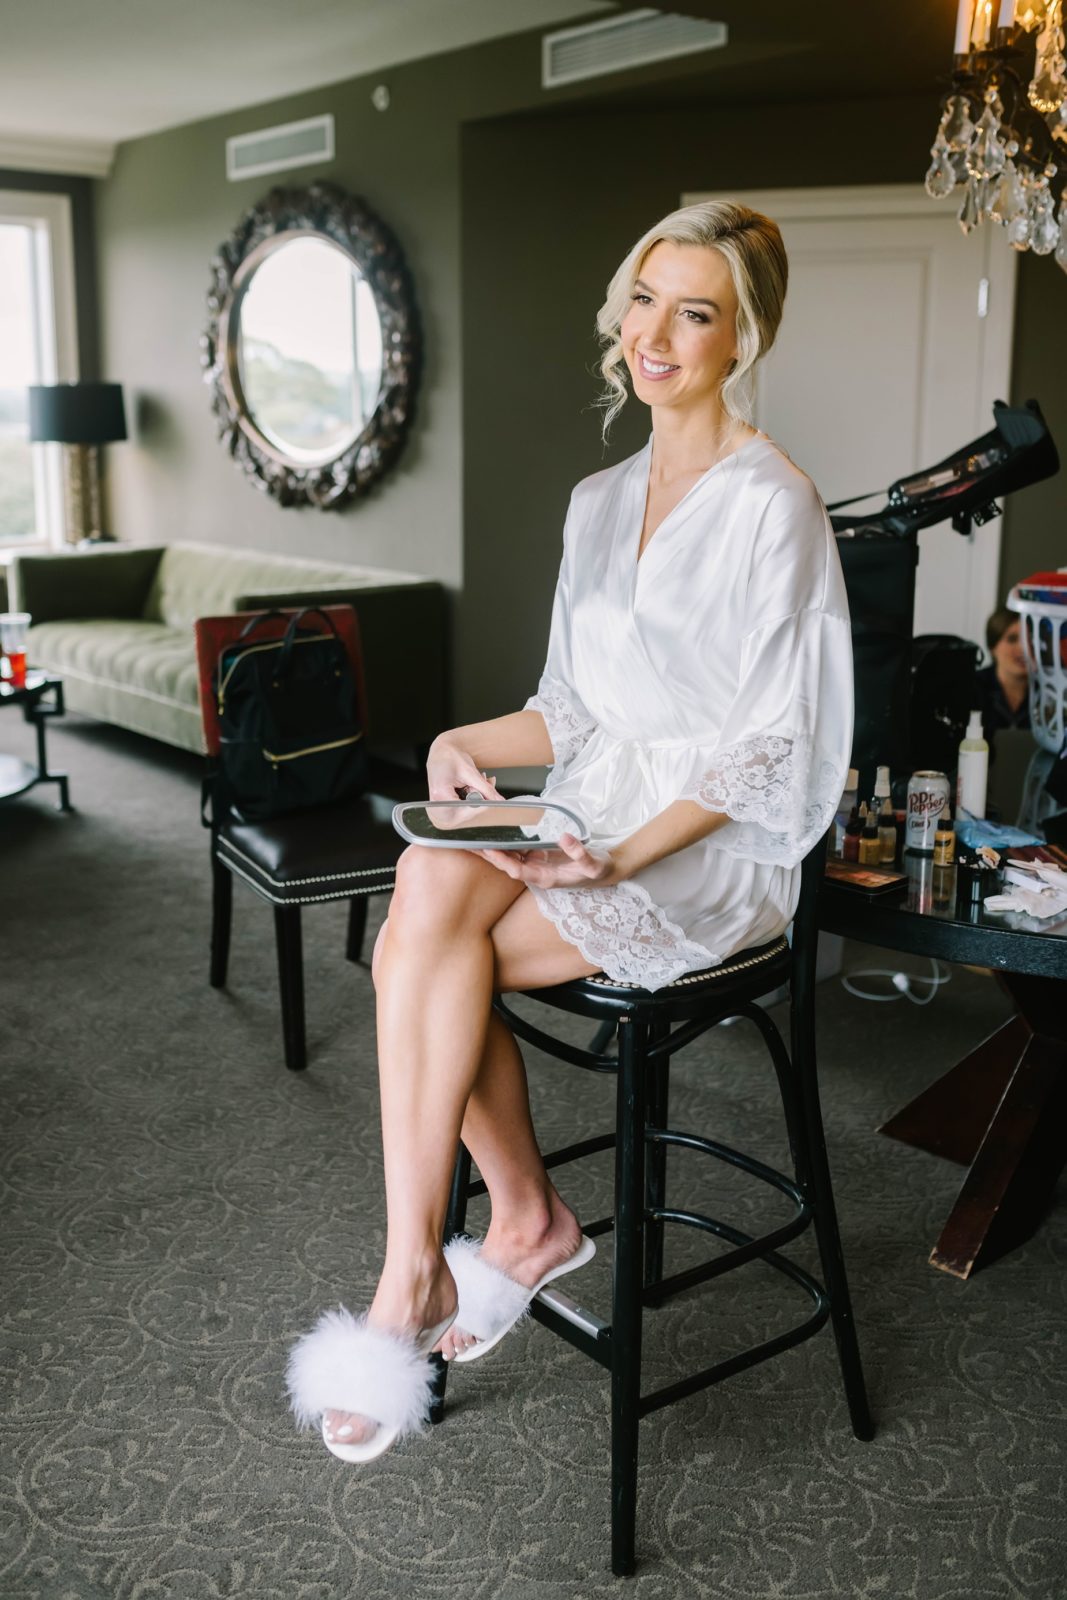 The bride sits on a stool in her white robe getting ready captured by Christina Elliott Photography. Bridal robe bridal makeup #christinaelliottphotography #Houstonweddings #catholicchurchweddings #navyblue #sayIdo #Houstonweddingphotographers